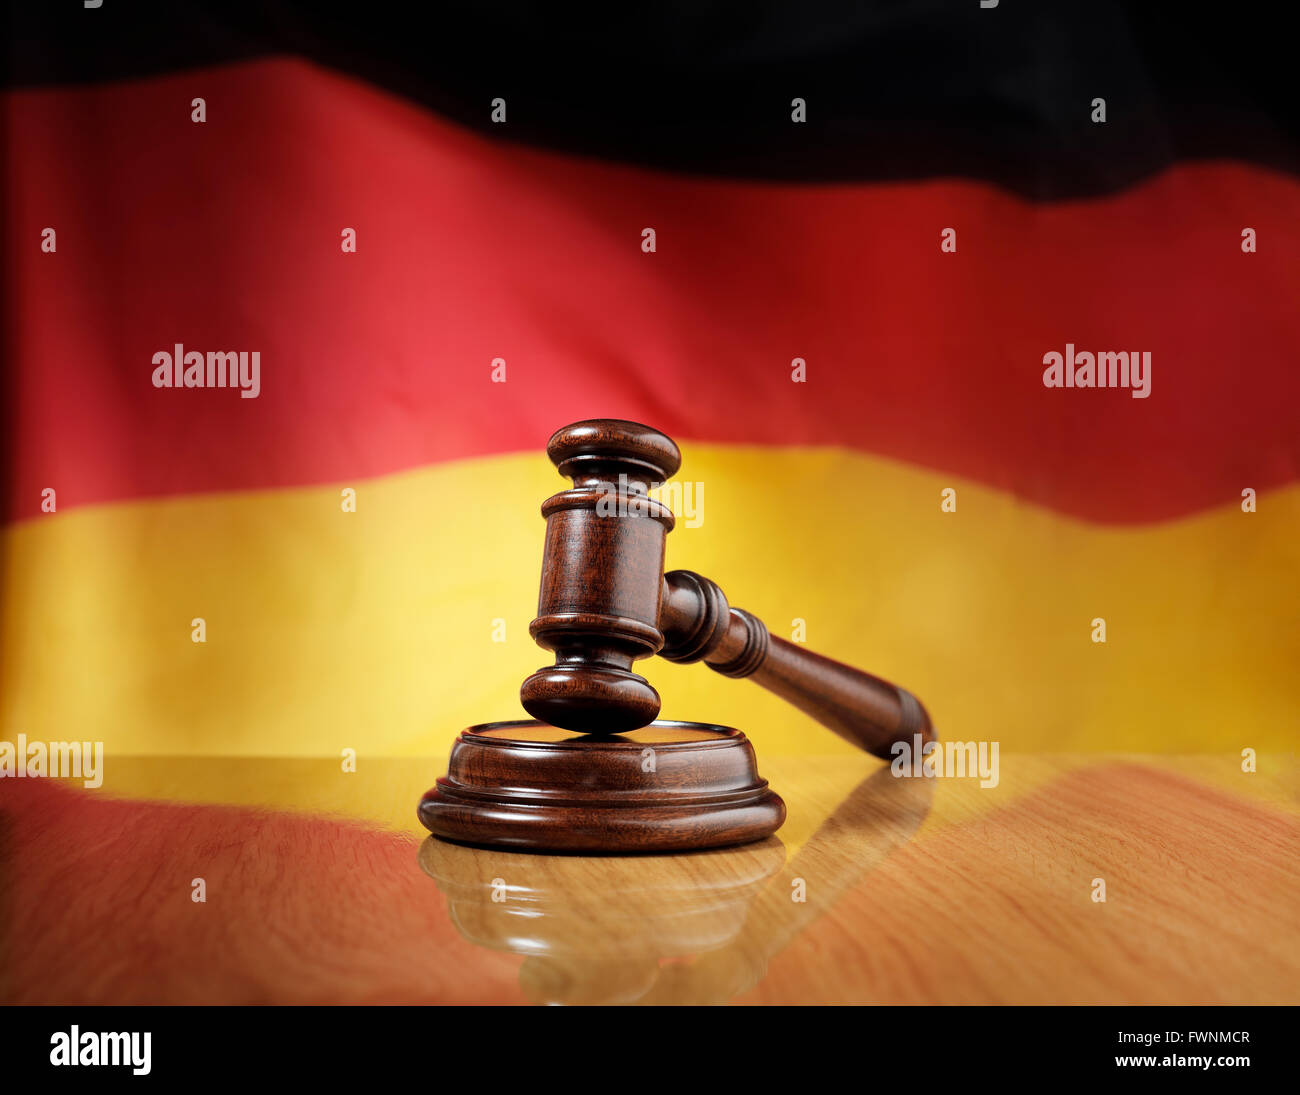 Mahogany wooden gavel on glossy wooden table, flag of Germany in the background. Stock Photo